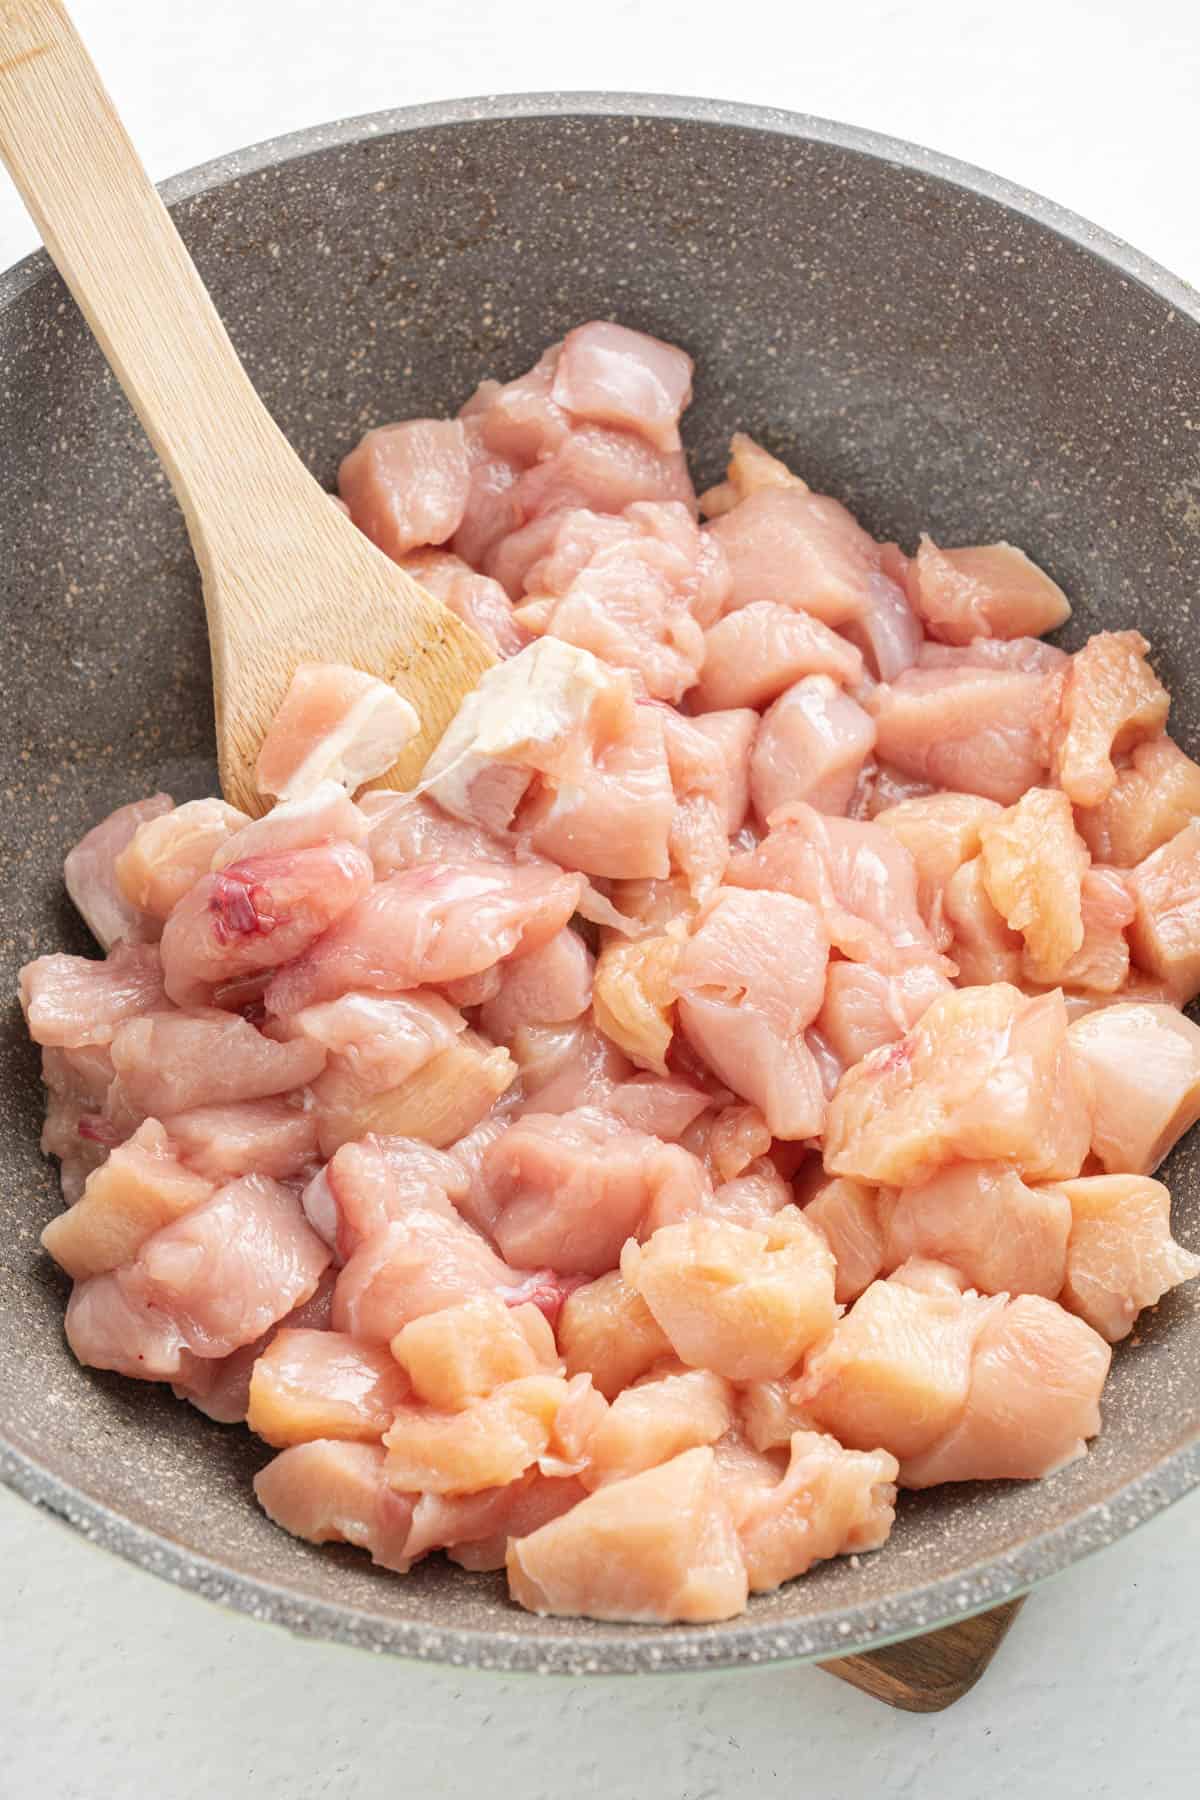 Stirring bite-size chunks of raw chicken in a pan with a spoon.